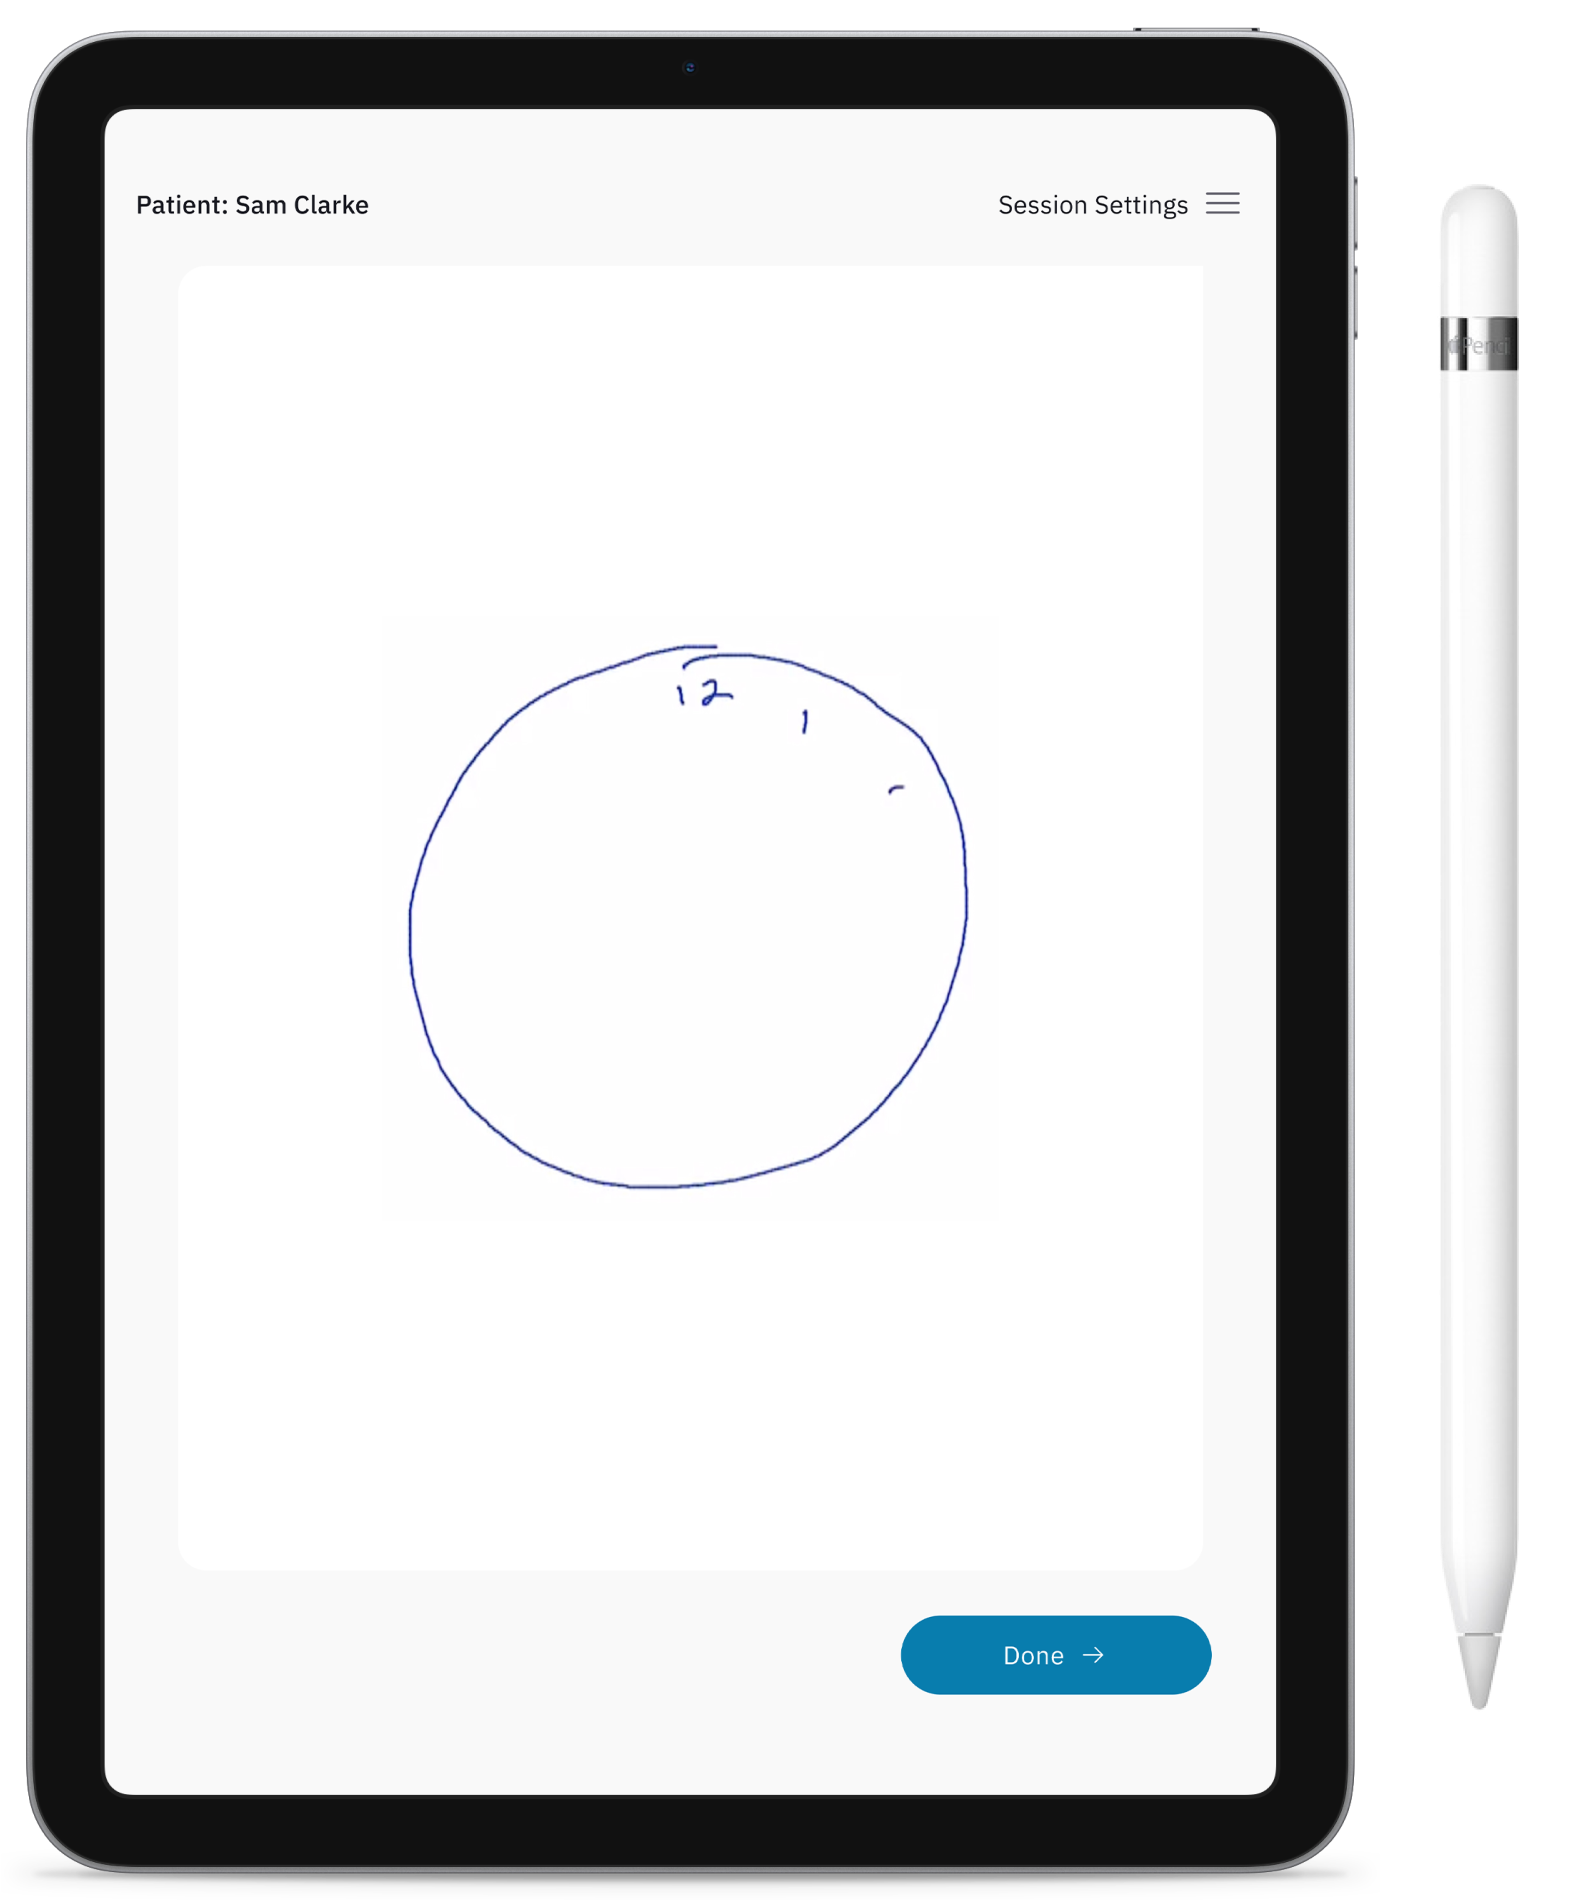 iPad showing a clock drawing test for Alzheimer's and dementia. Digital cognitive assessments offer greater insights into a patient's cognitive function over traditional cognitive testing methods.